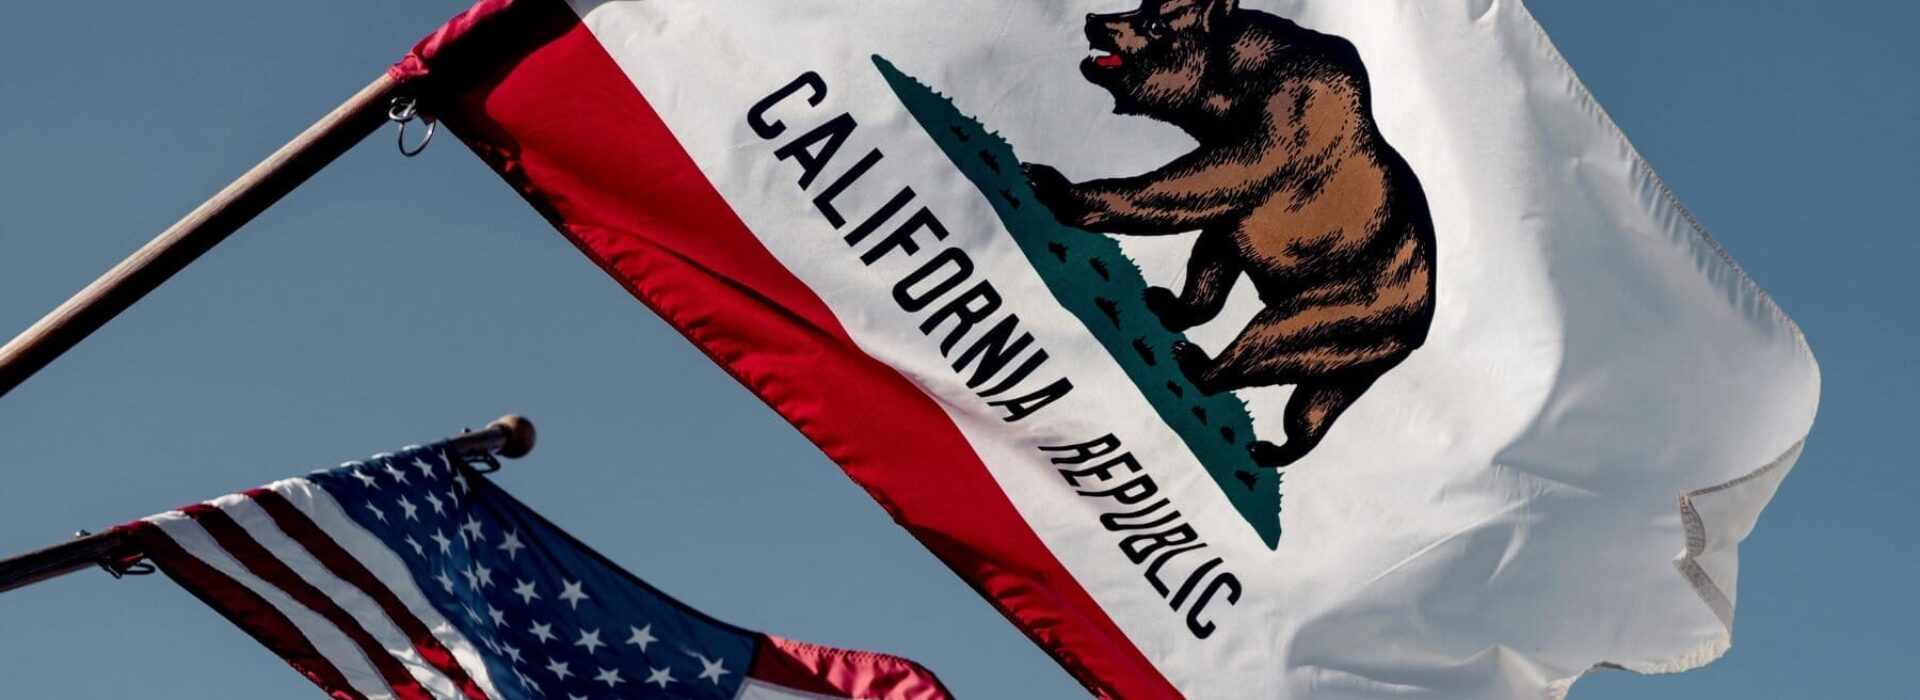 California and American flag waving against a blue sky background